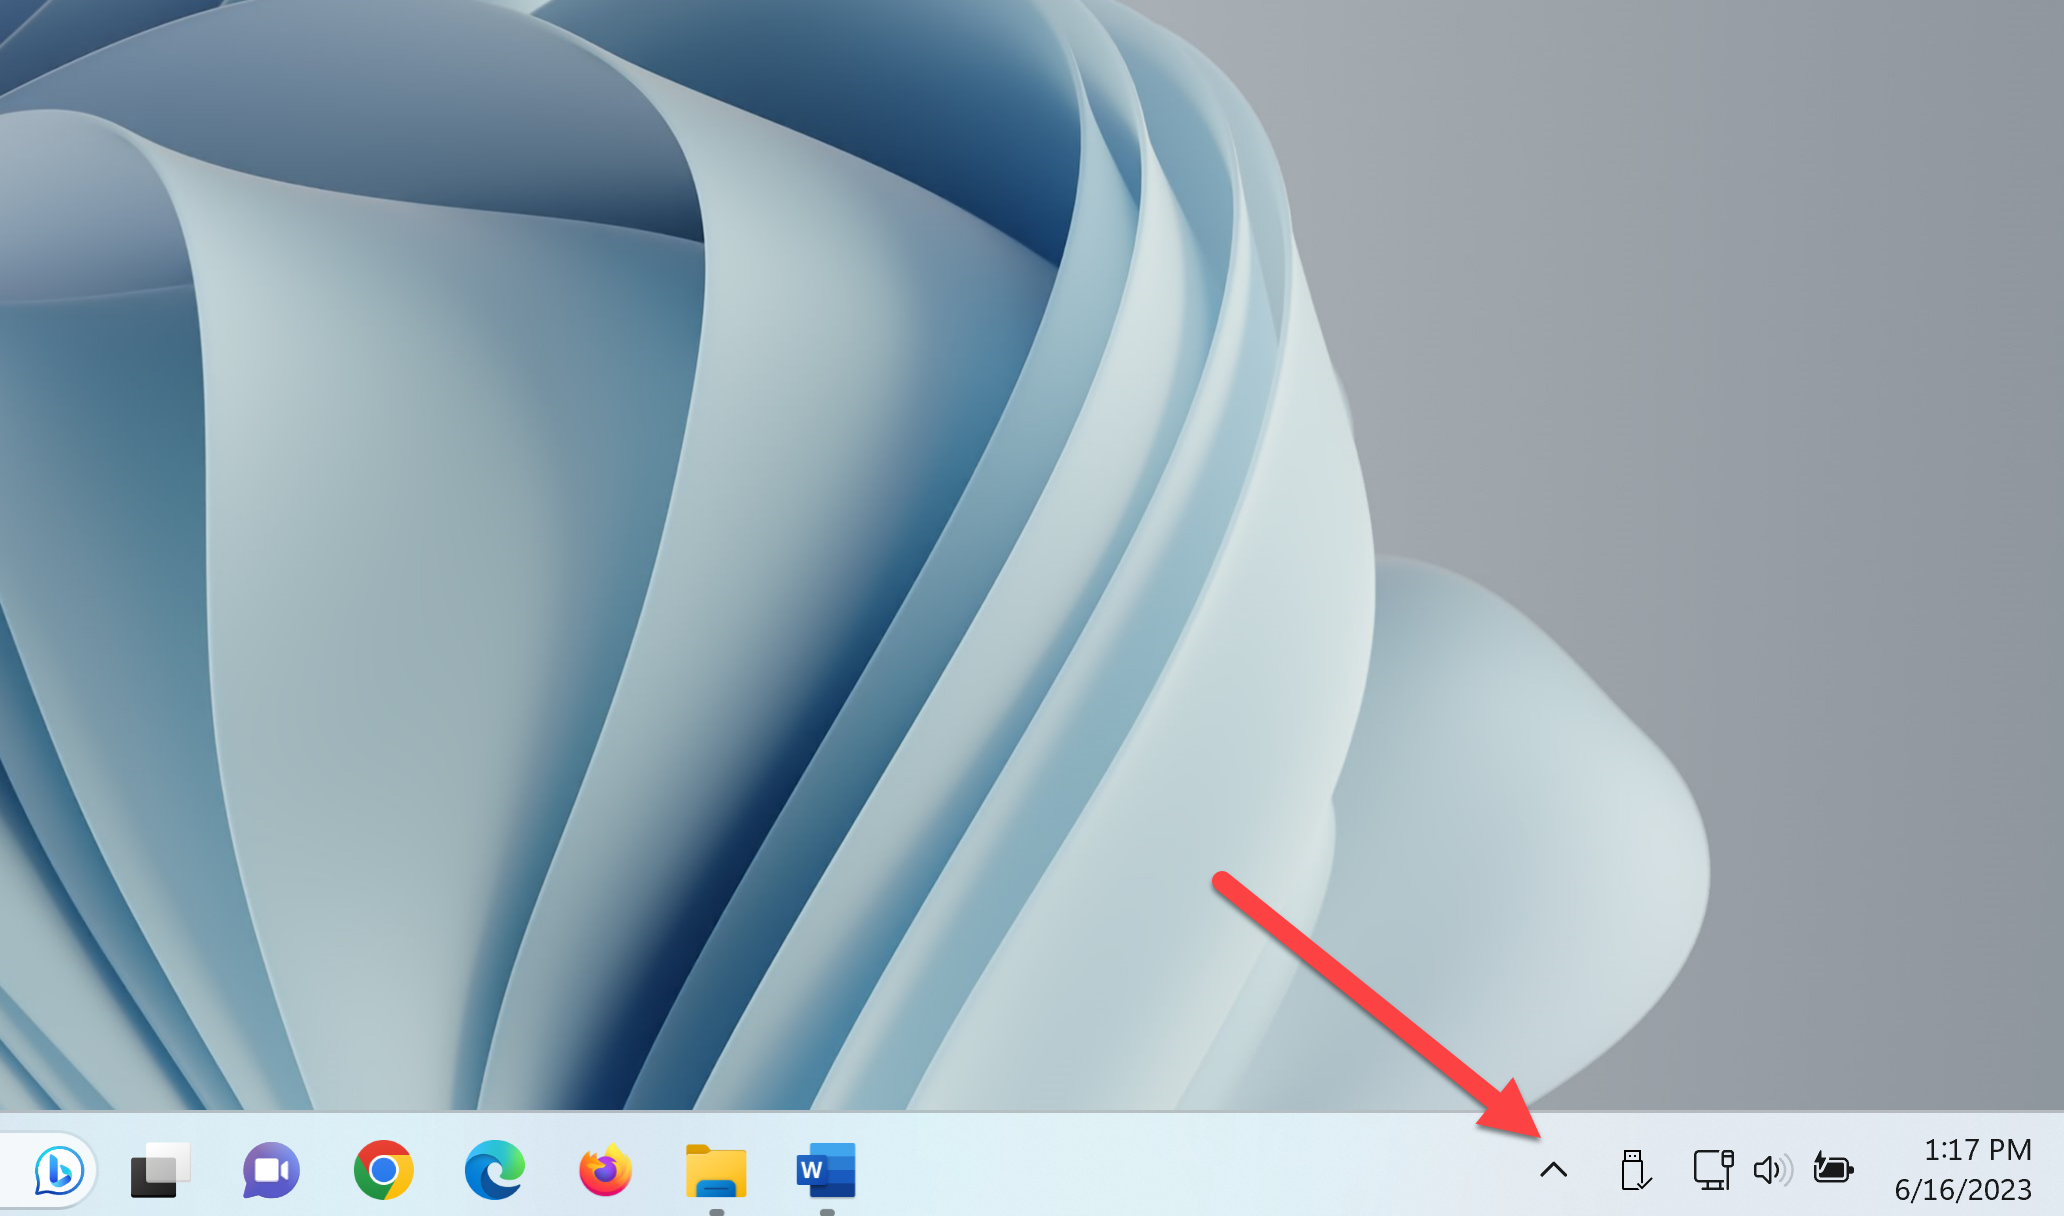 The Taskbar corner showing System Tray icons and the Show Hidden Icons button.